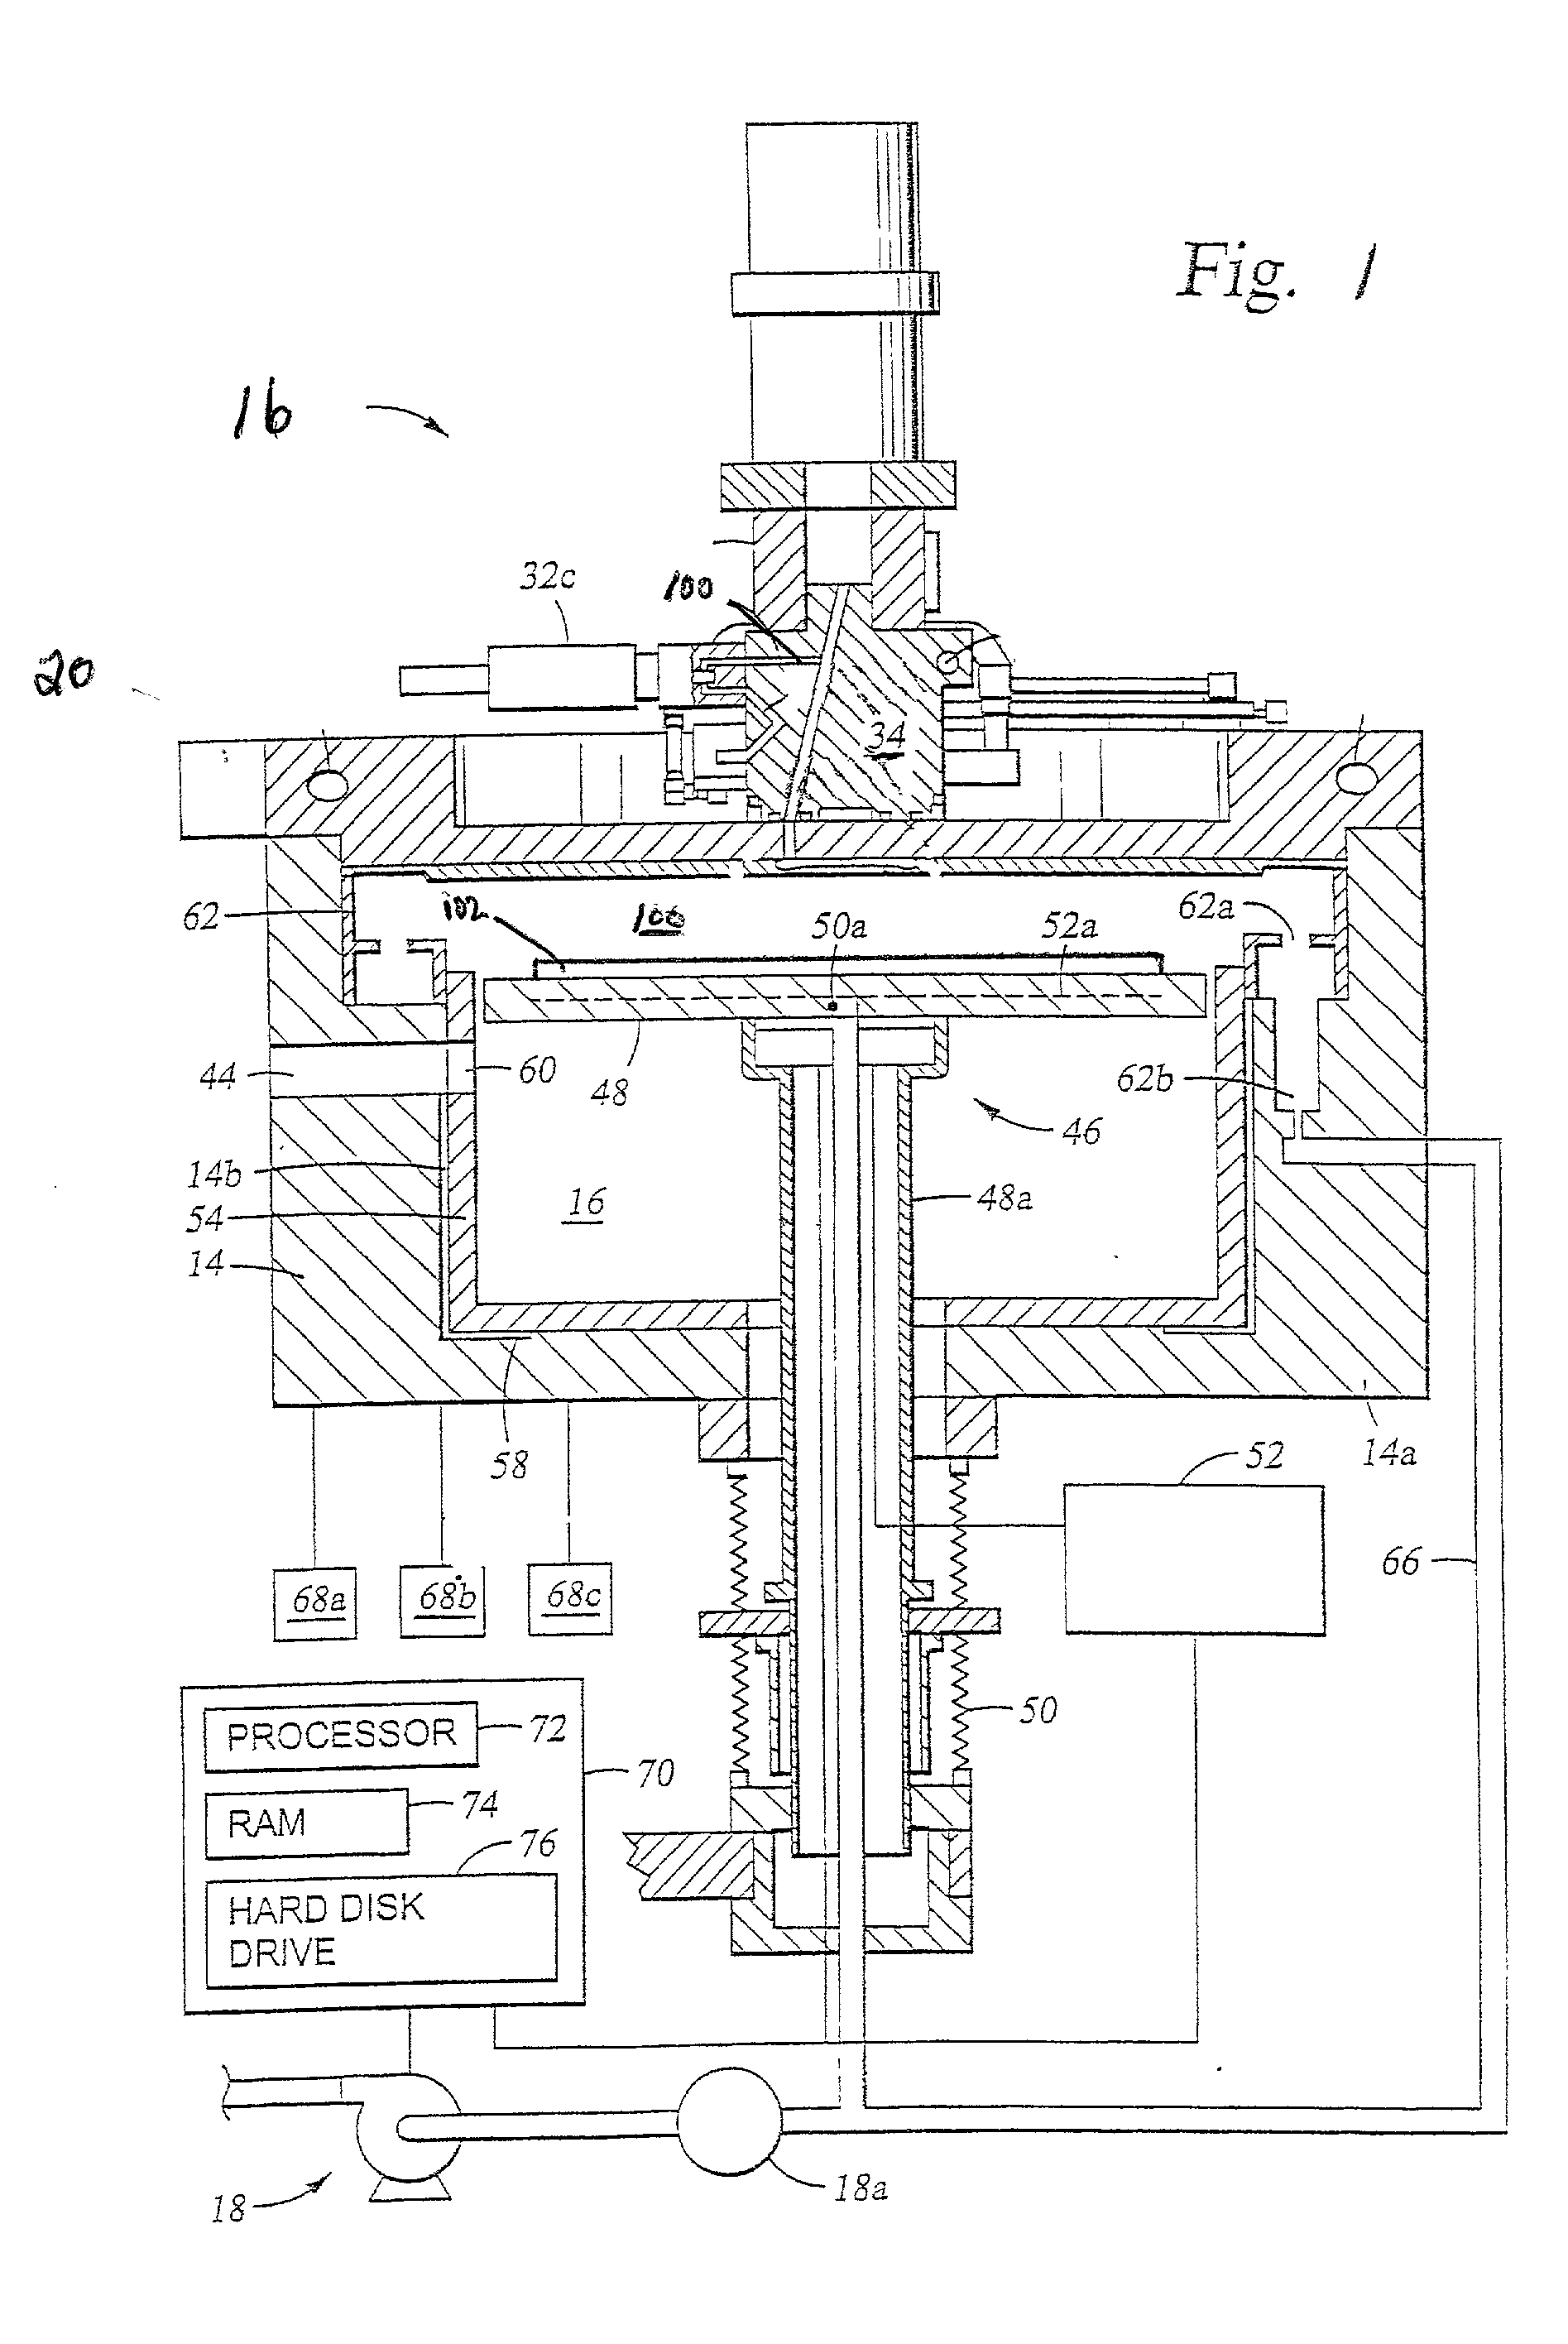 Cyclical deposition of tungsten nitride for metal oxide gate electrode